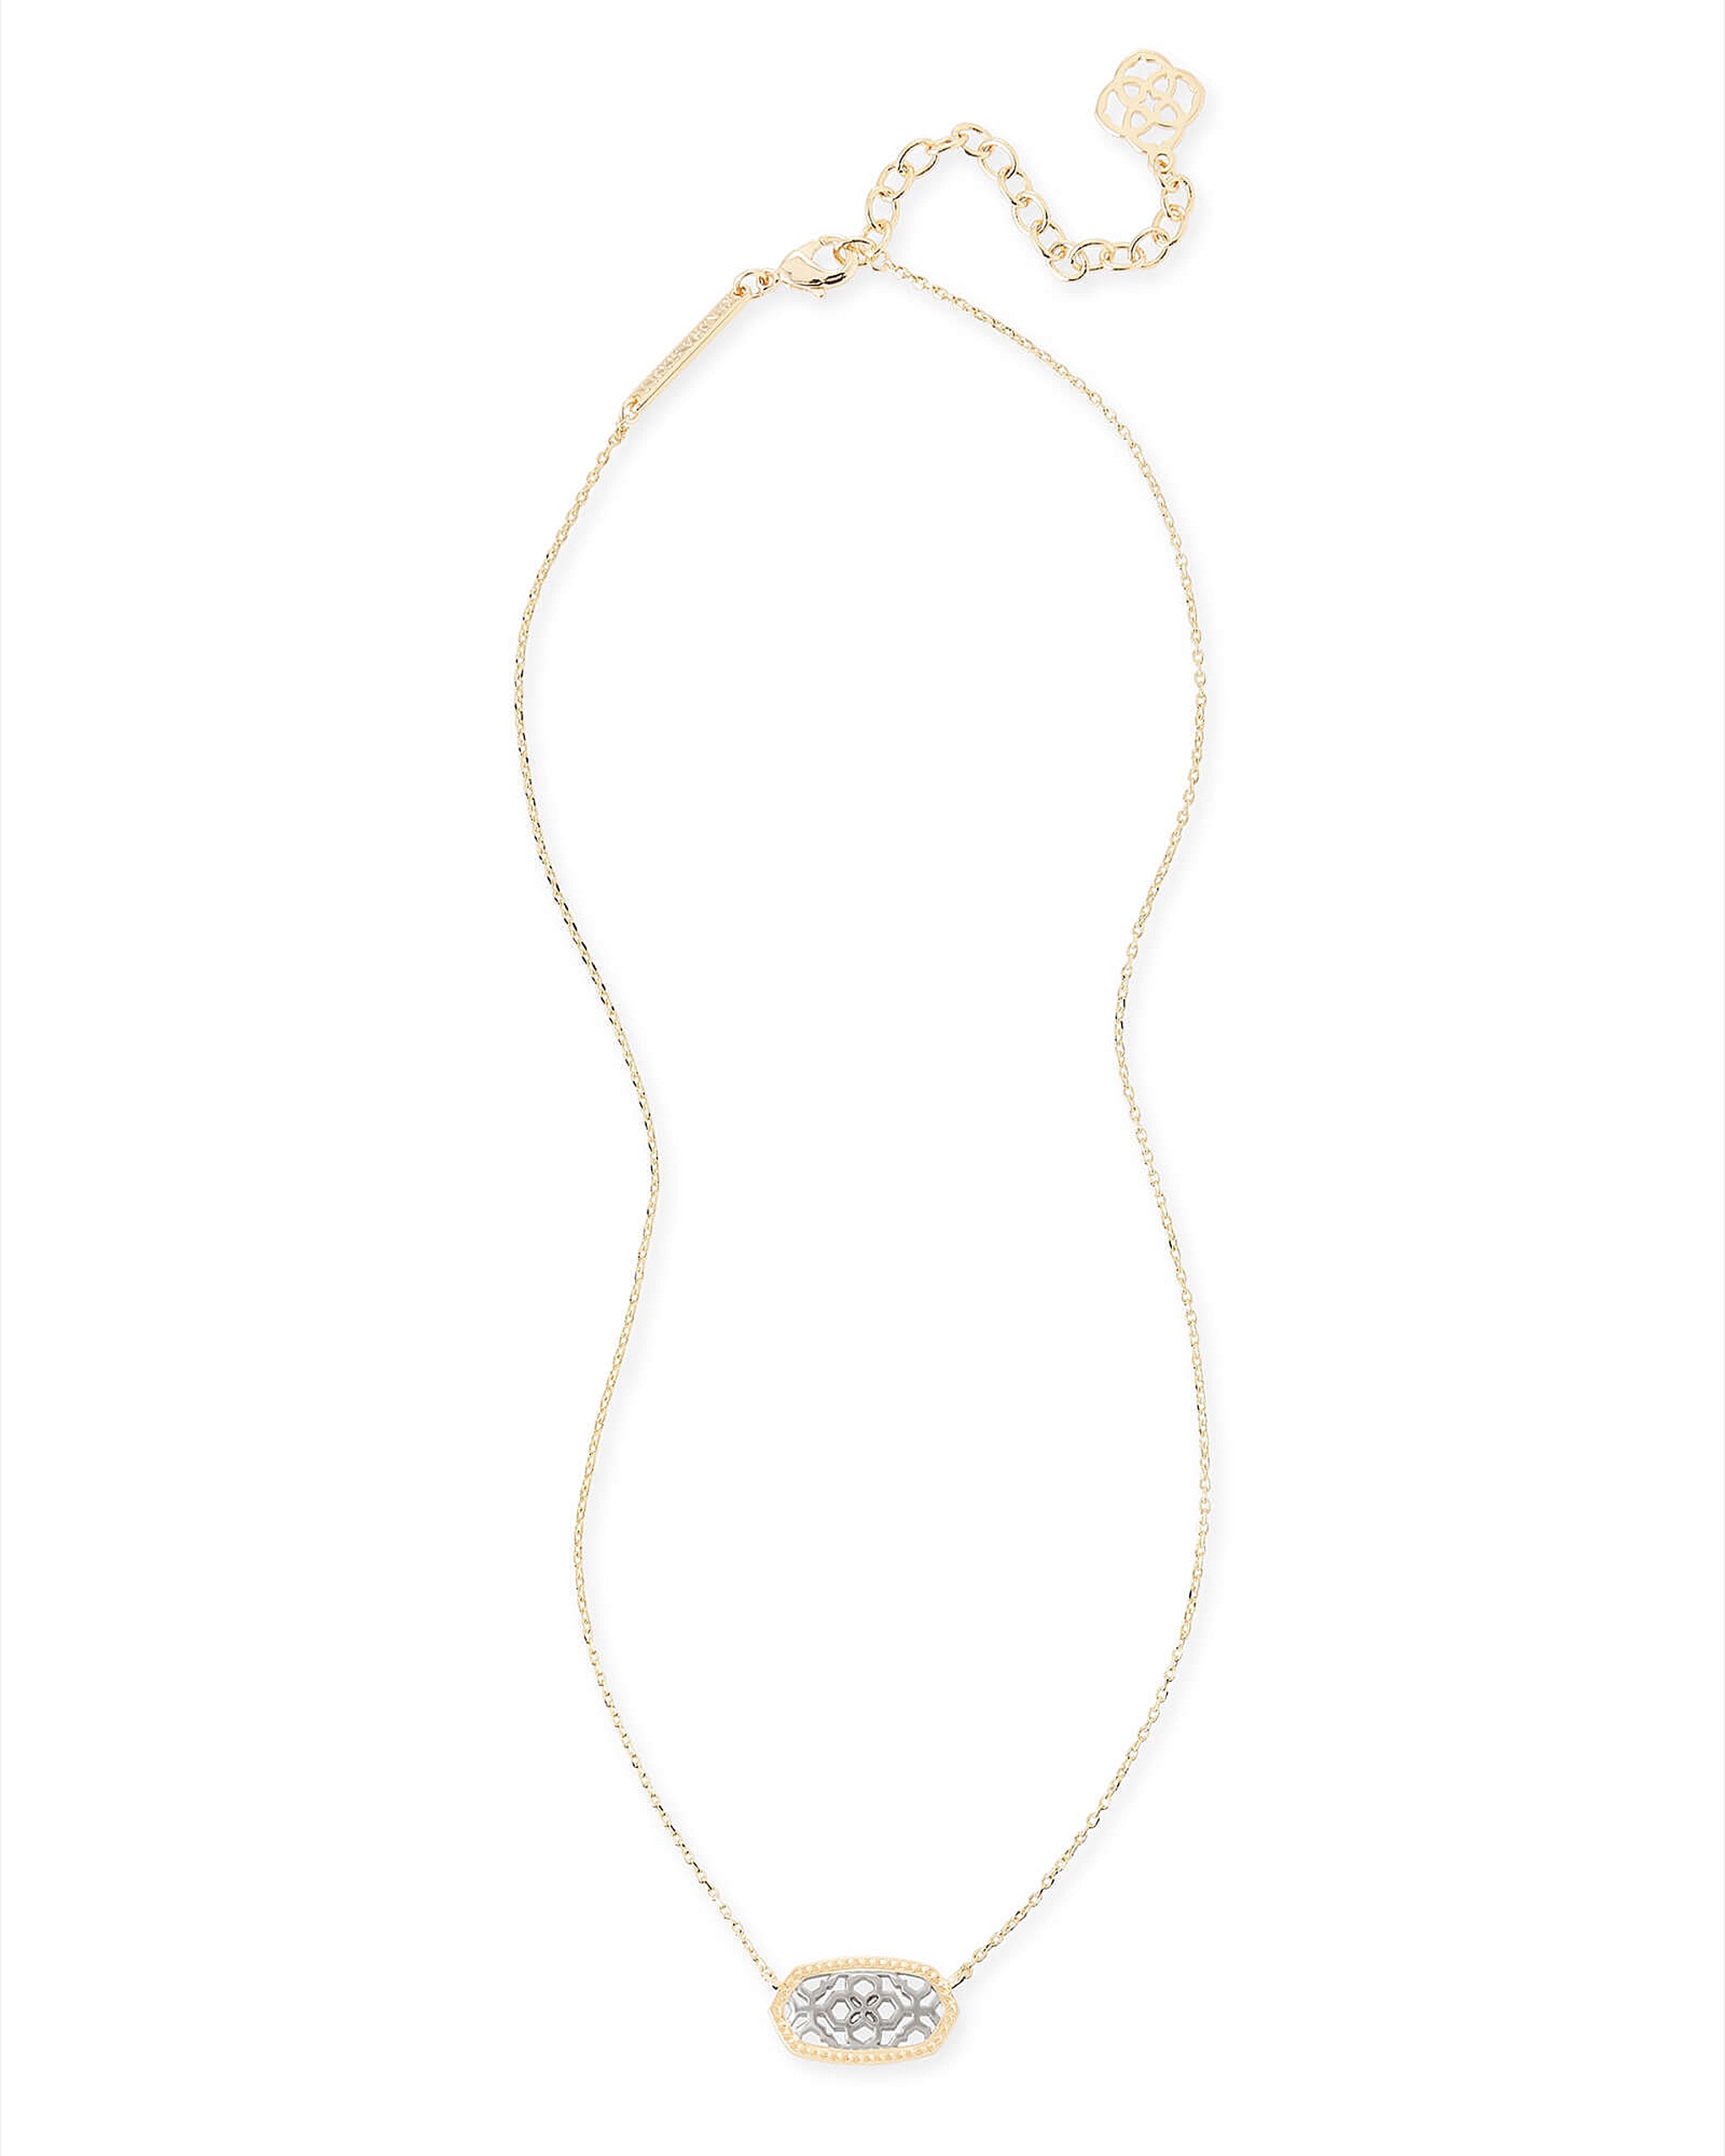 Kendra Scott Elisa Oval Filigree Pendant Necklace in Gold and Rhodium